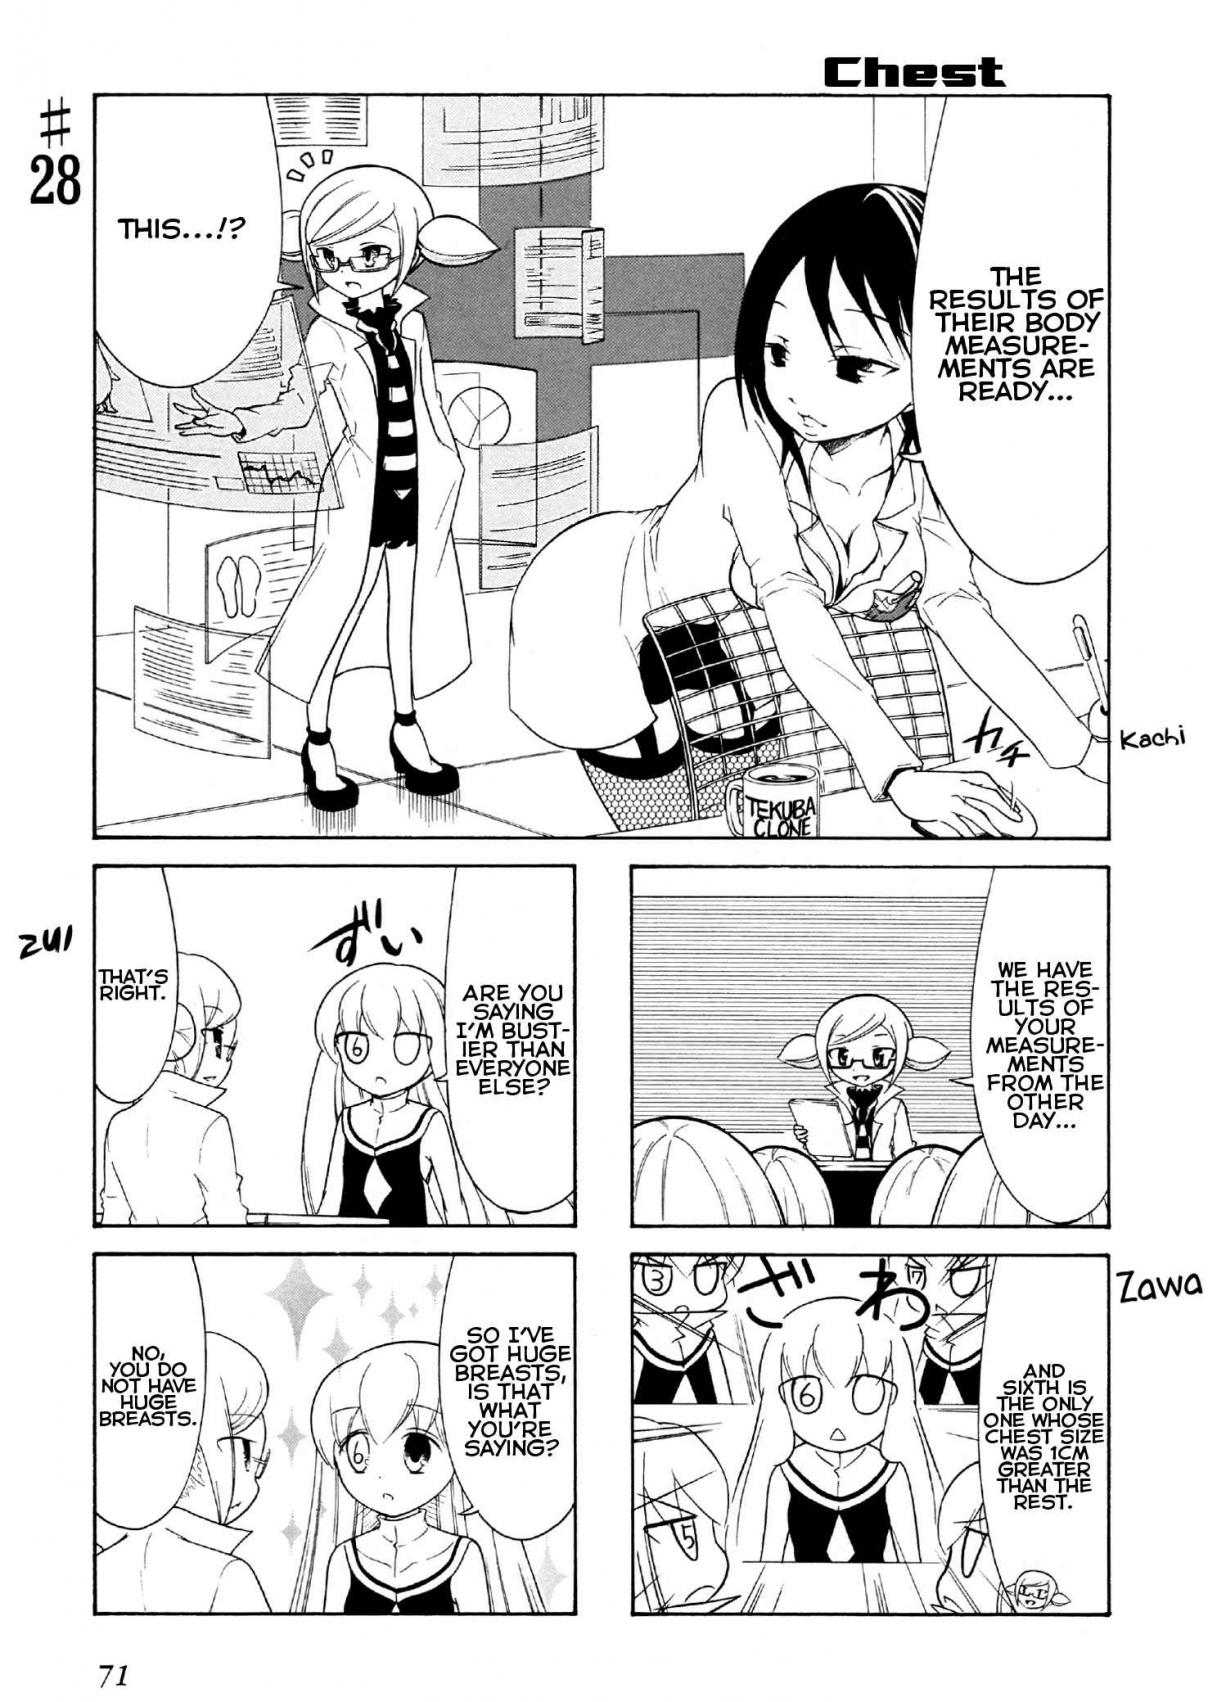 Number Girl Vol. 2 Ch. 28